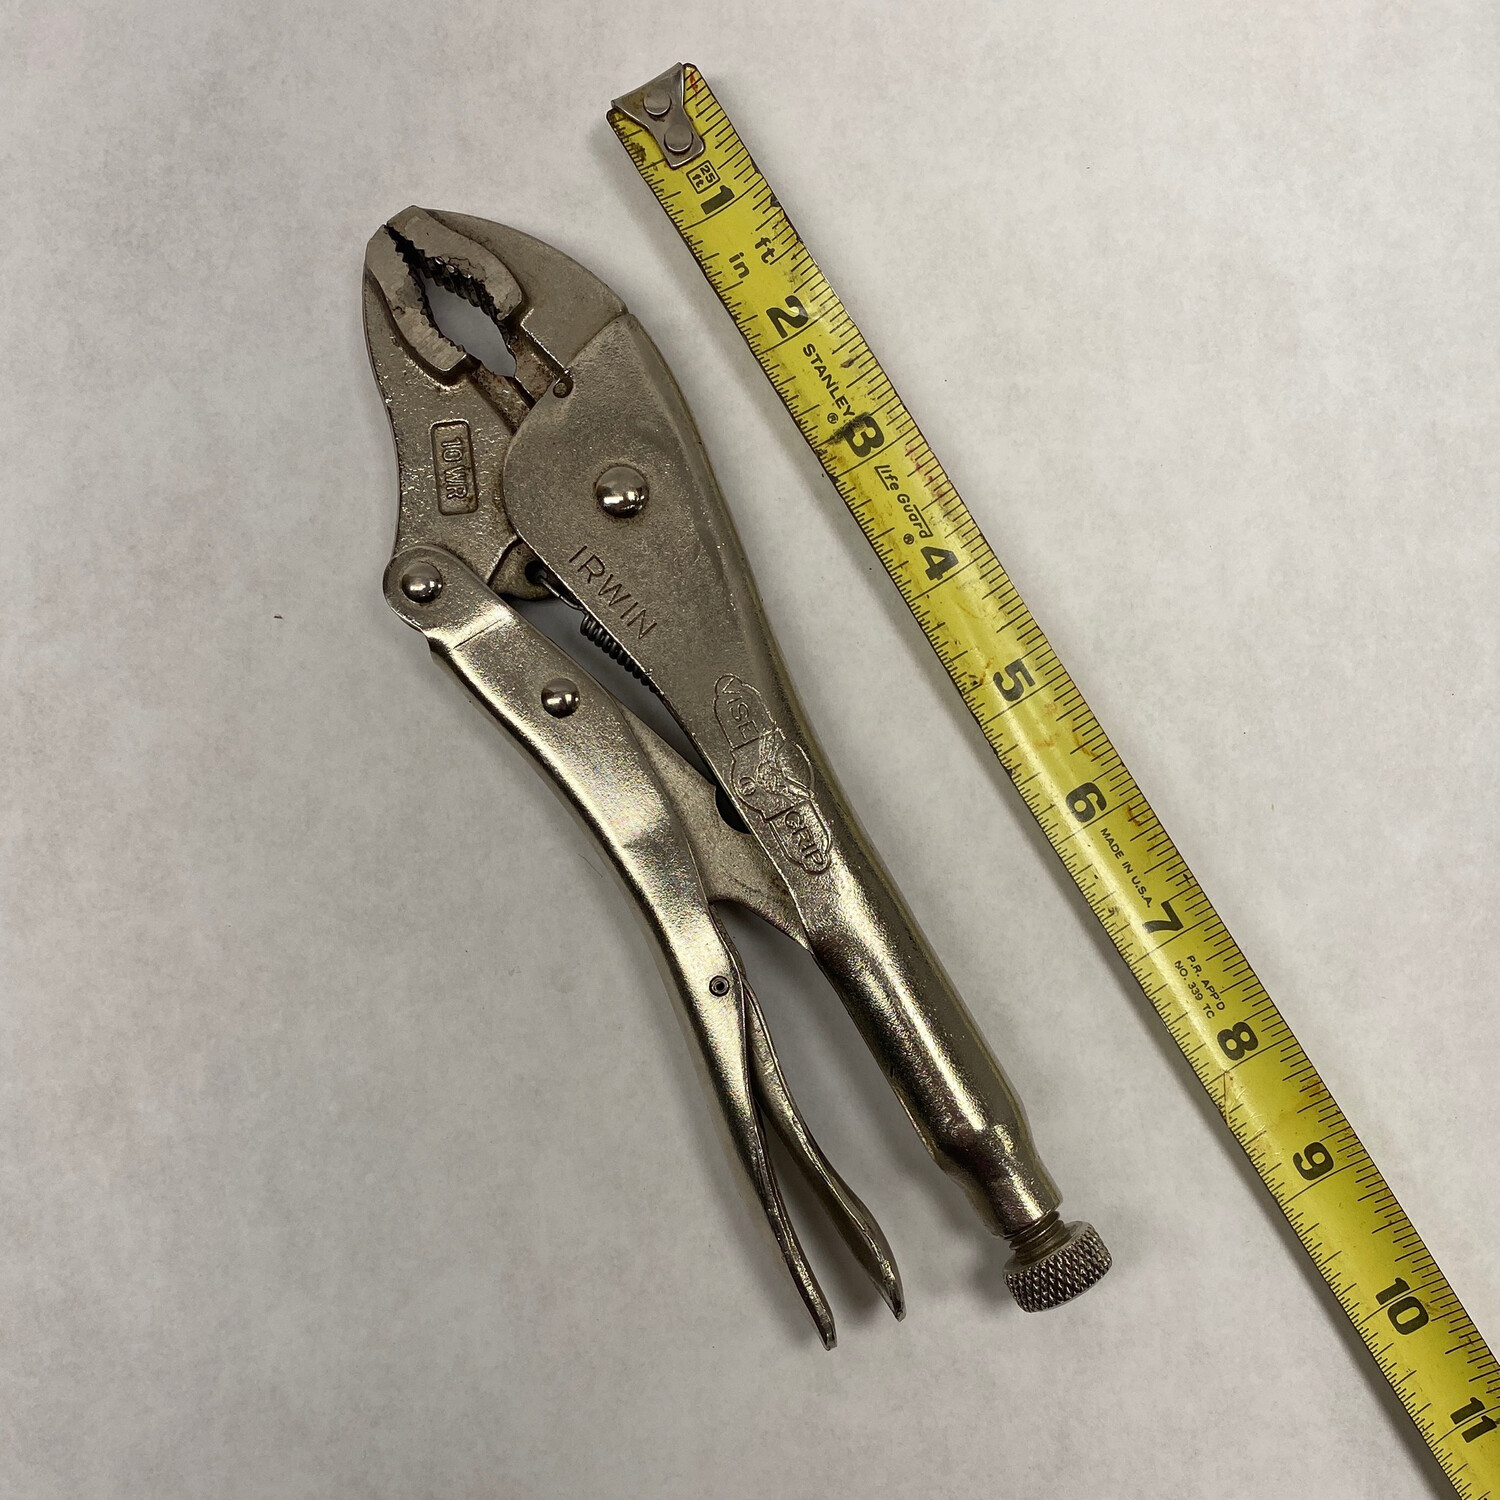 Irwin Vise-Grip 9” Curved Jaw Locking Pliers